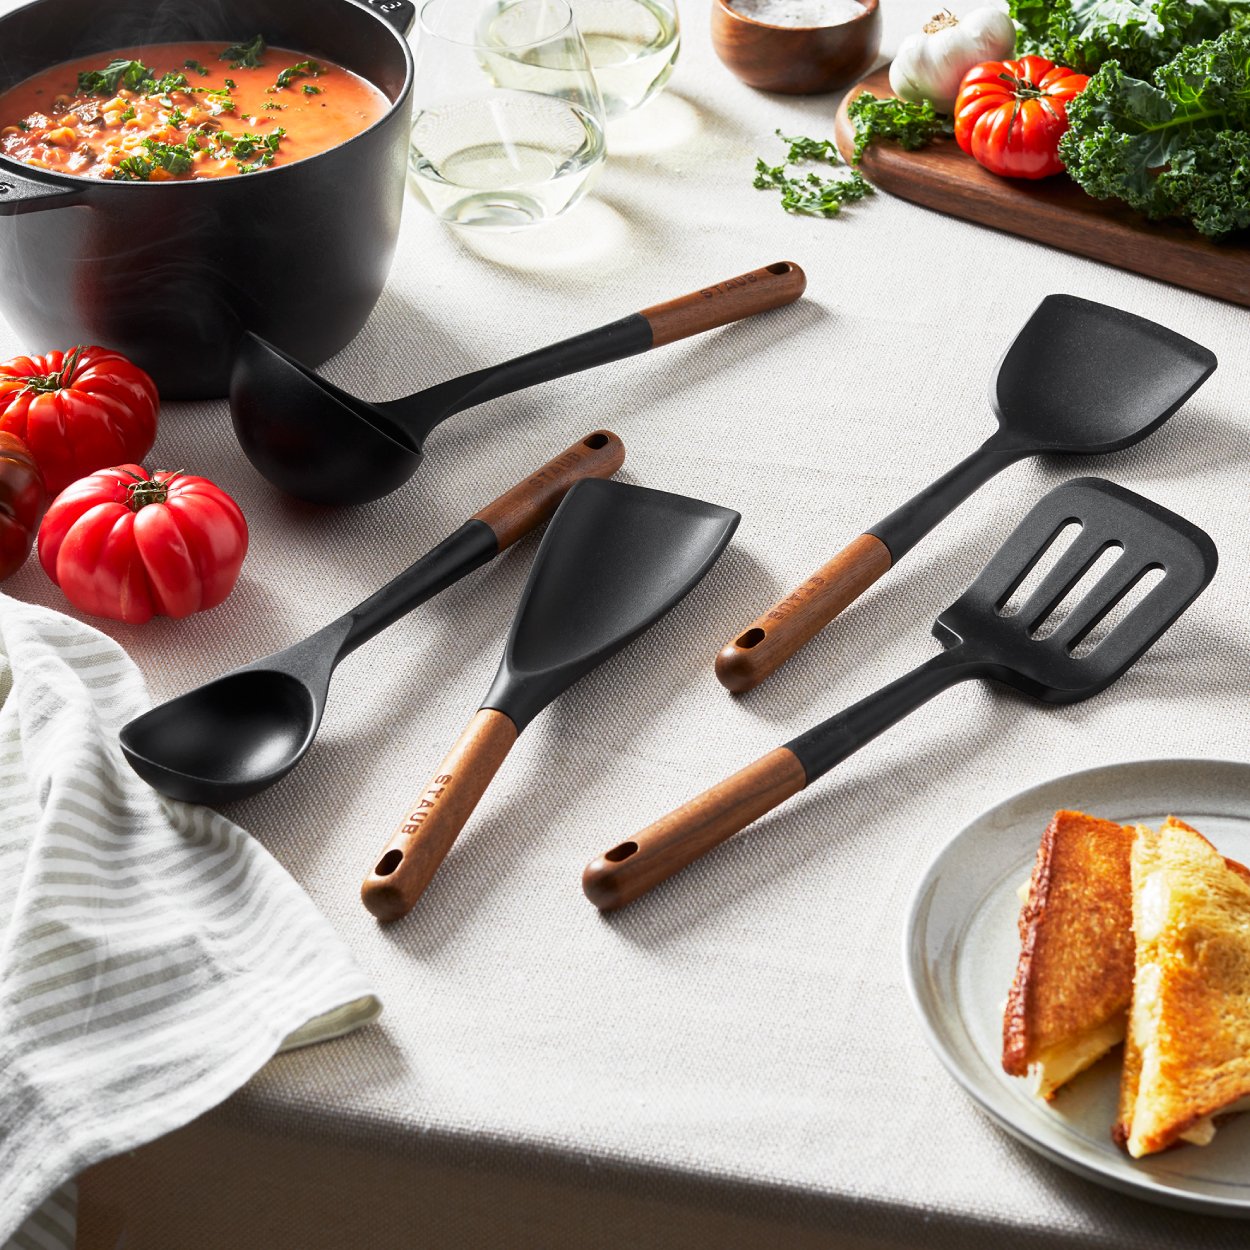 https://www.zwilling.com/on/demandware.static/-/Sites-zwilling-us-Library/default/dw04e1c8e5/images/product-content/masonry-content/staub/tools/StaubToolsMasonry_600-600_5.jpg